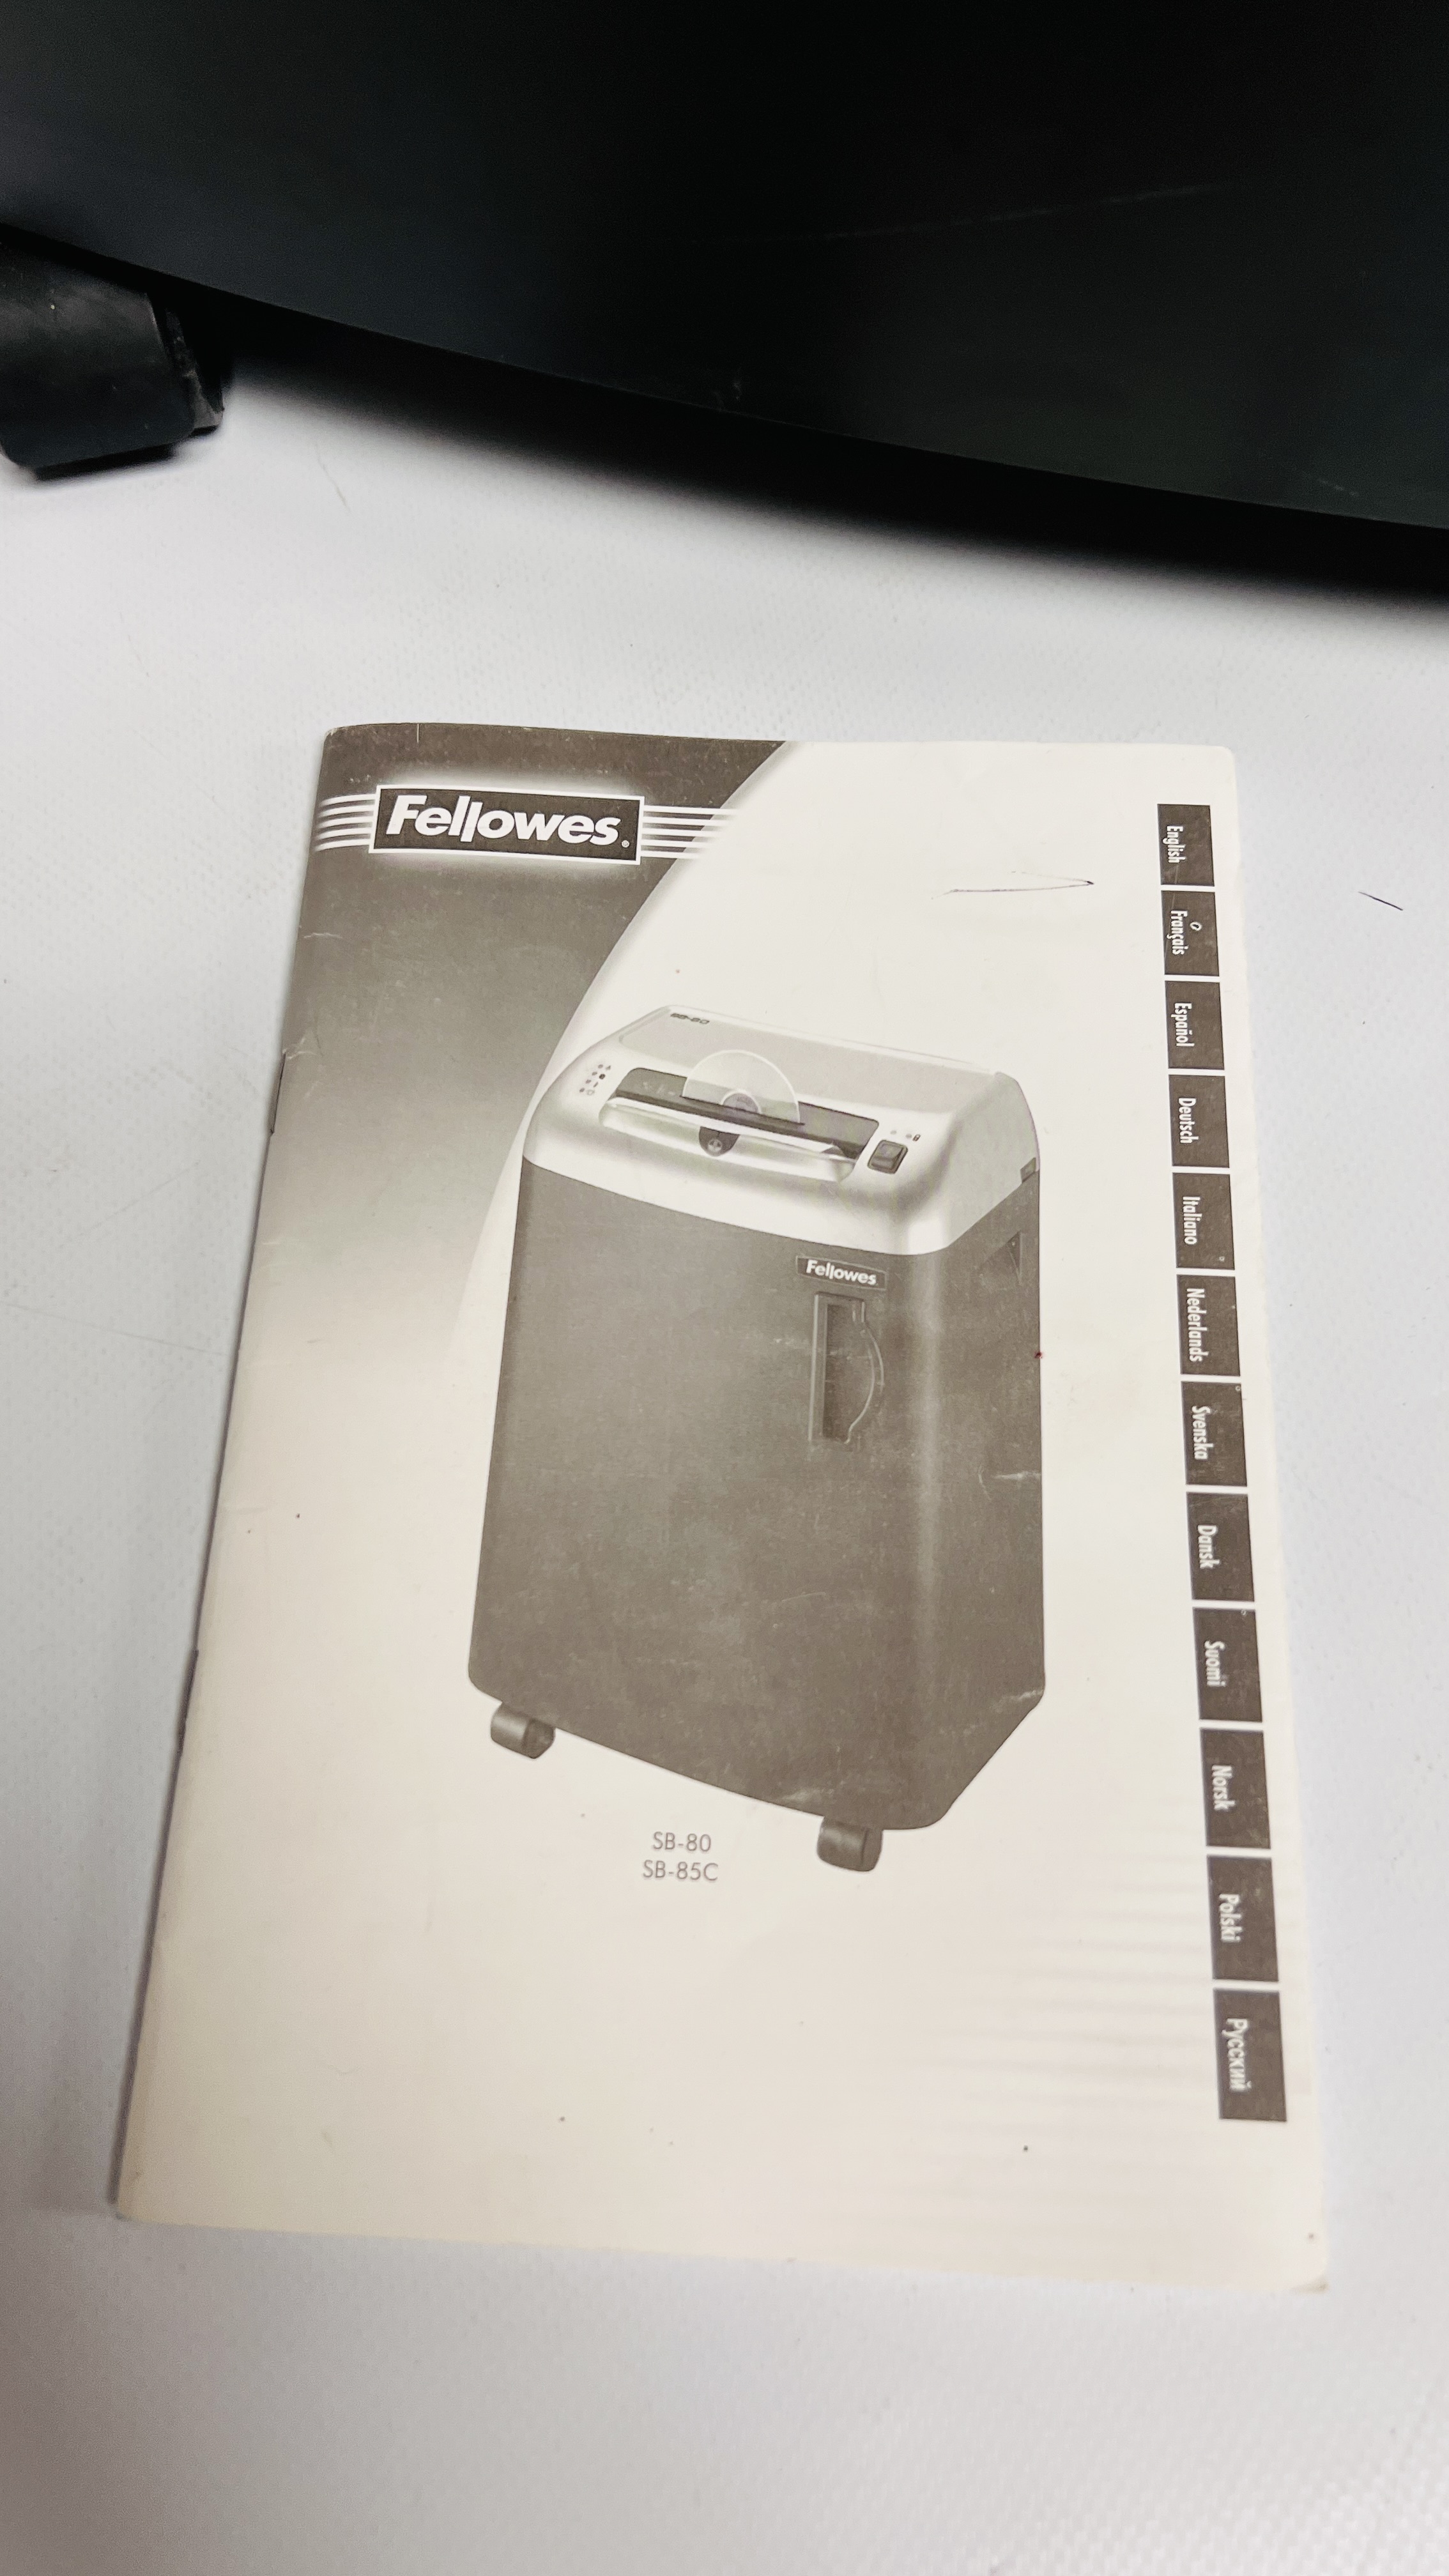 A FELLOWS SB-85C PAPER AND DISC SHREDDER WITH INSTRUCTIONS - SOLD AS SEEN - Image 2 of 6